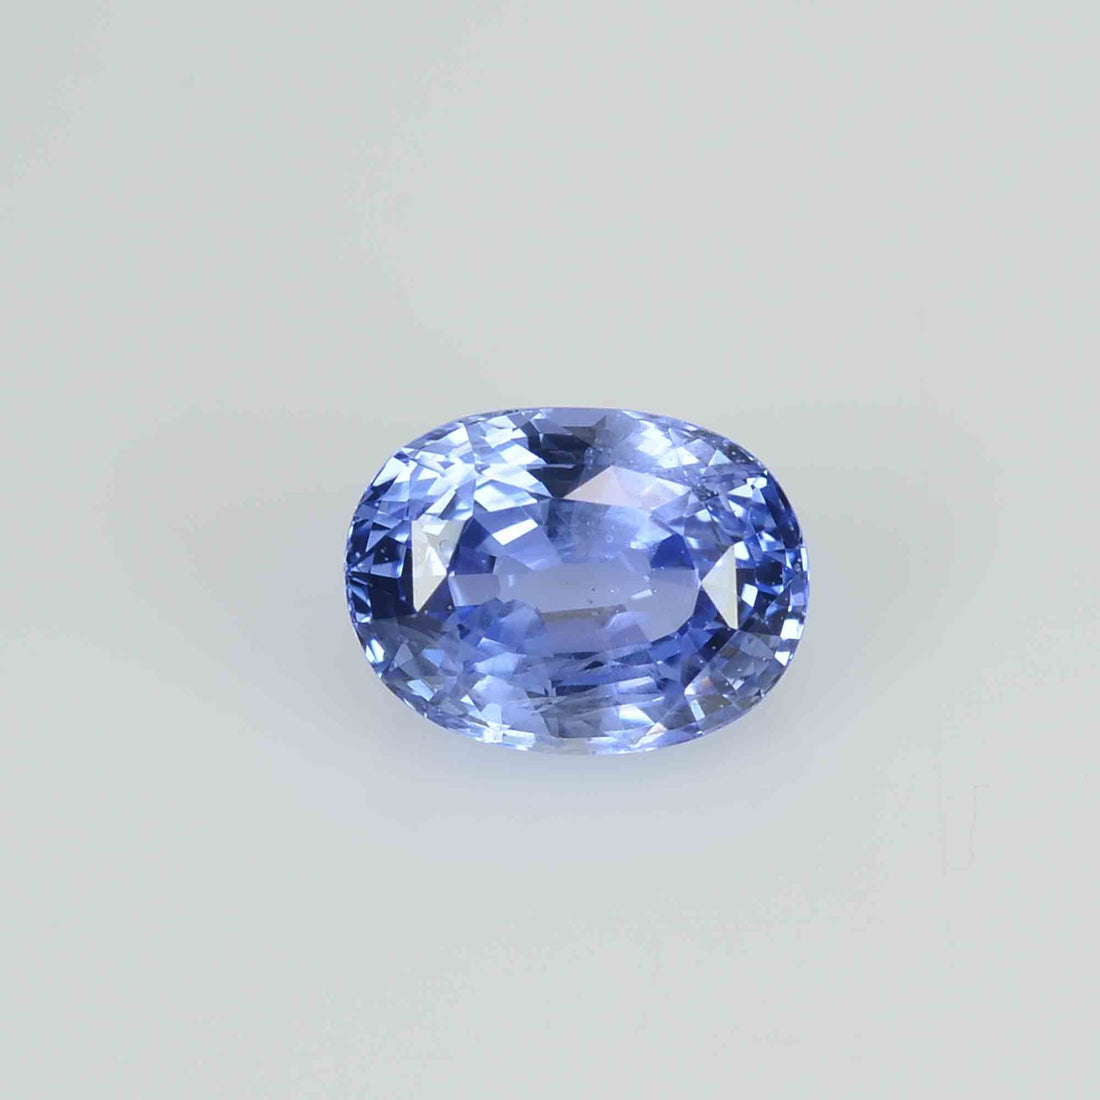 2.99 cts Unheated Natural Blue Sapphire Loose Gemstone Oval Cut Certified